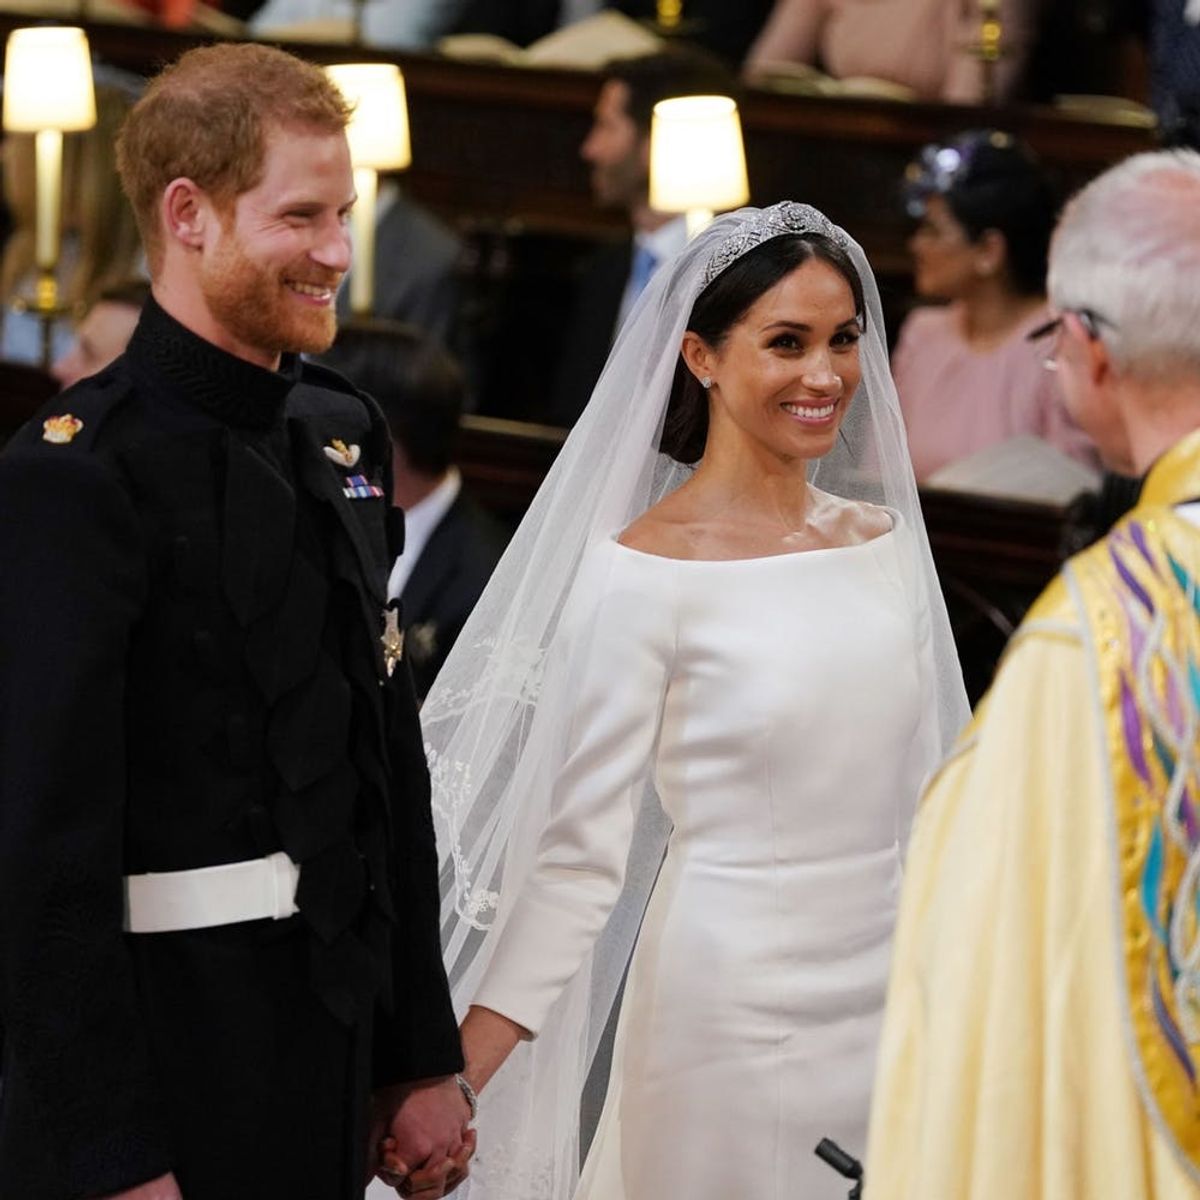 There’s an Official Royal Wedding Album on Spotify So You Can Relive Every Magical Moment